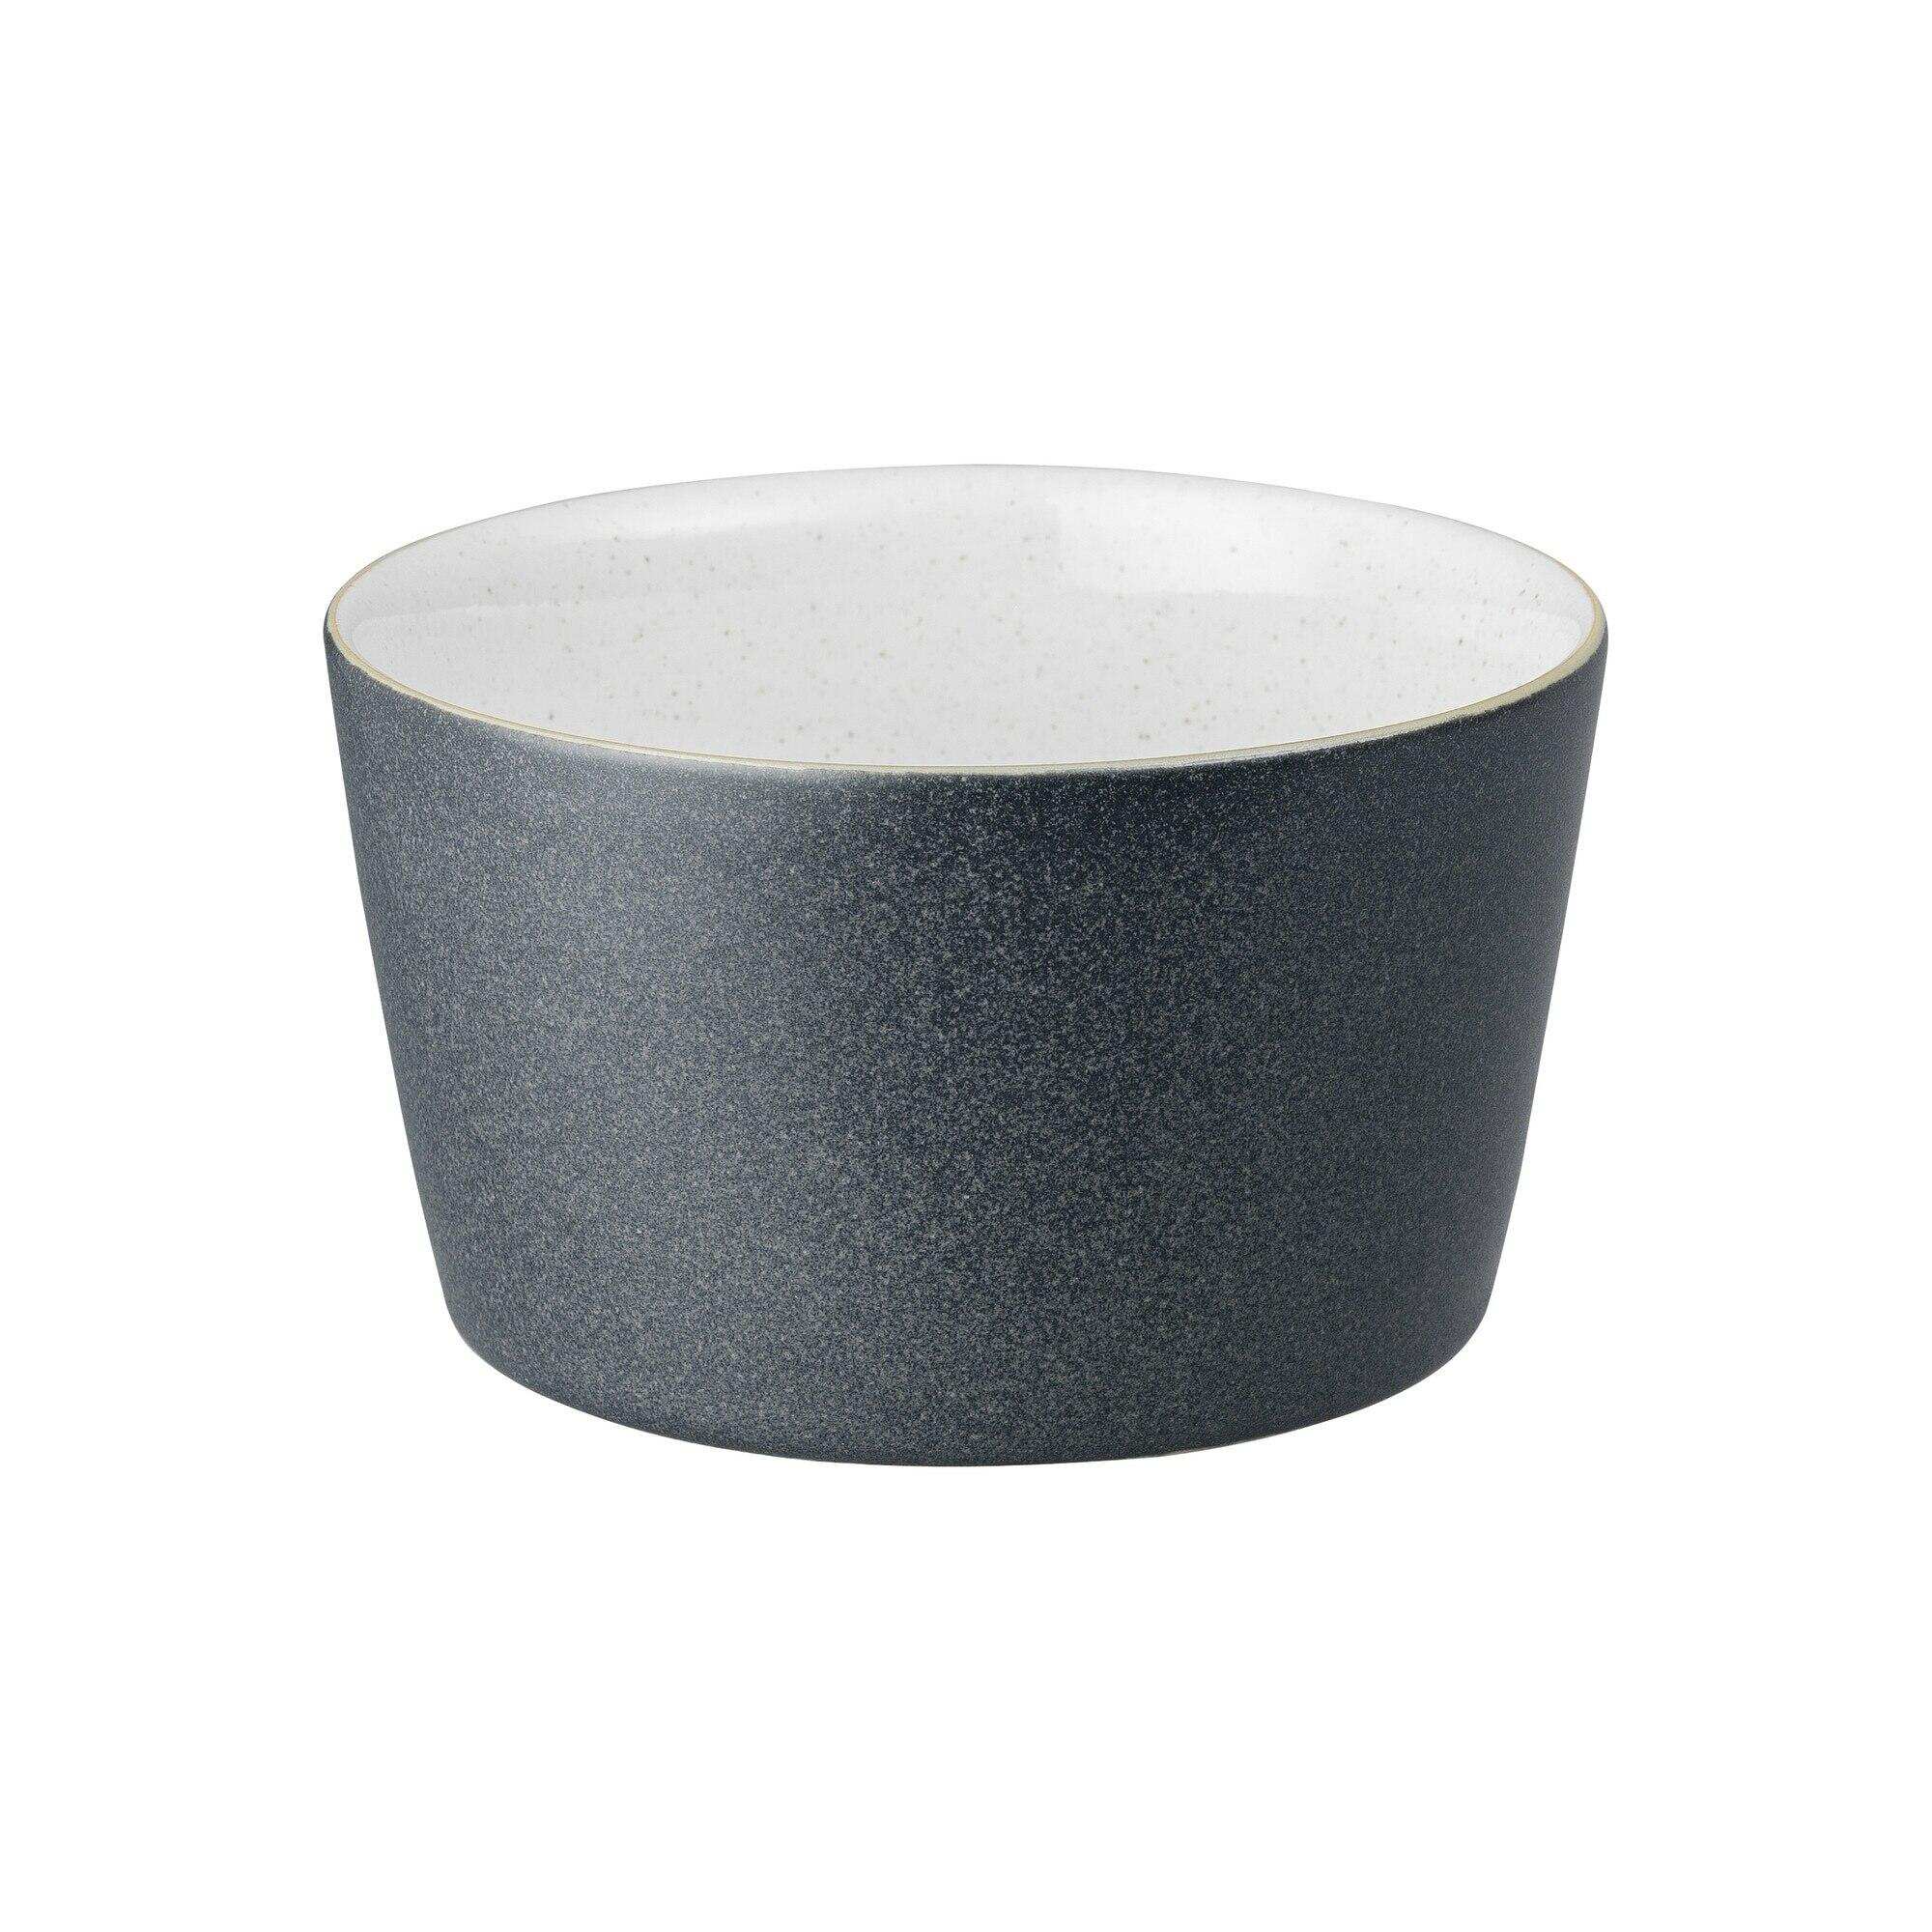 Impression Charcoal Blue Straight Small Bowl